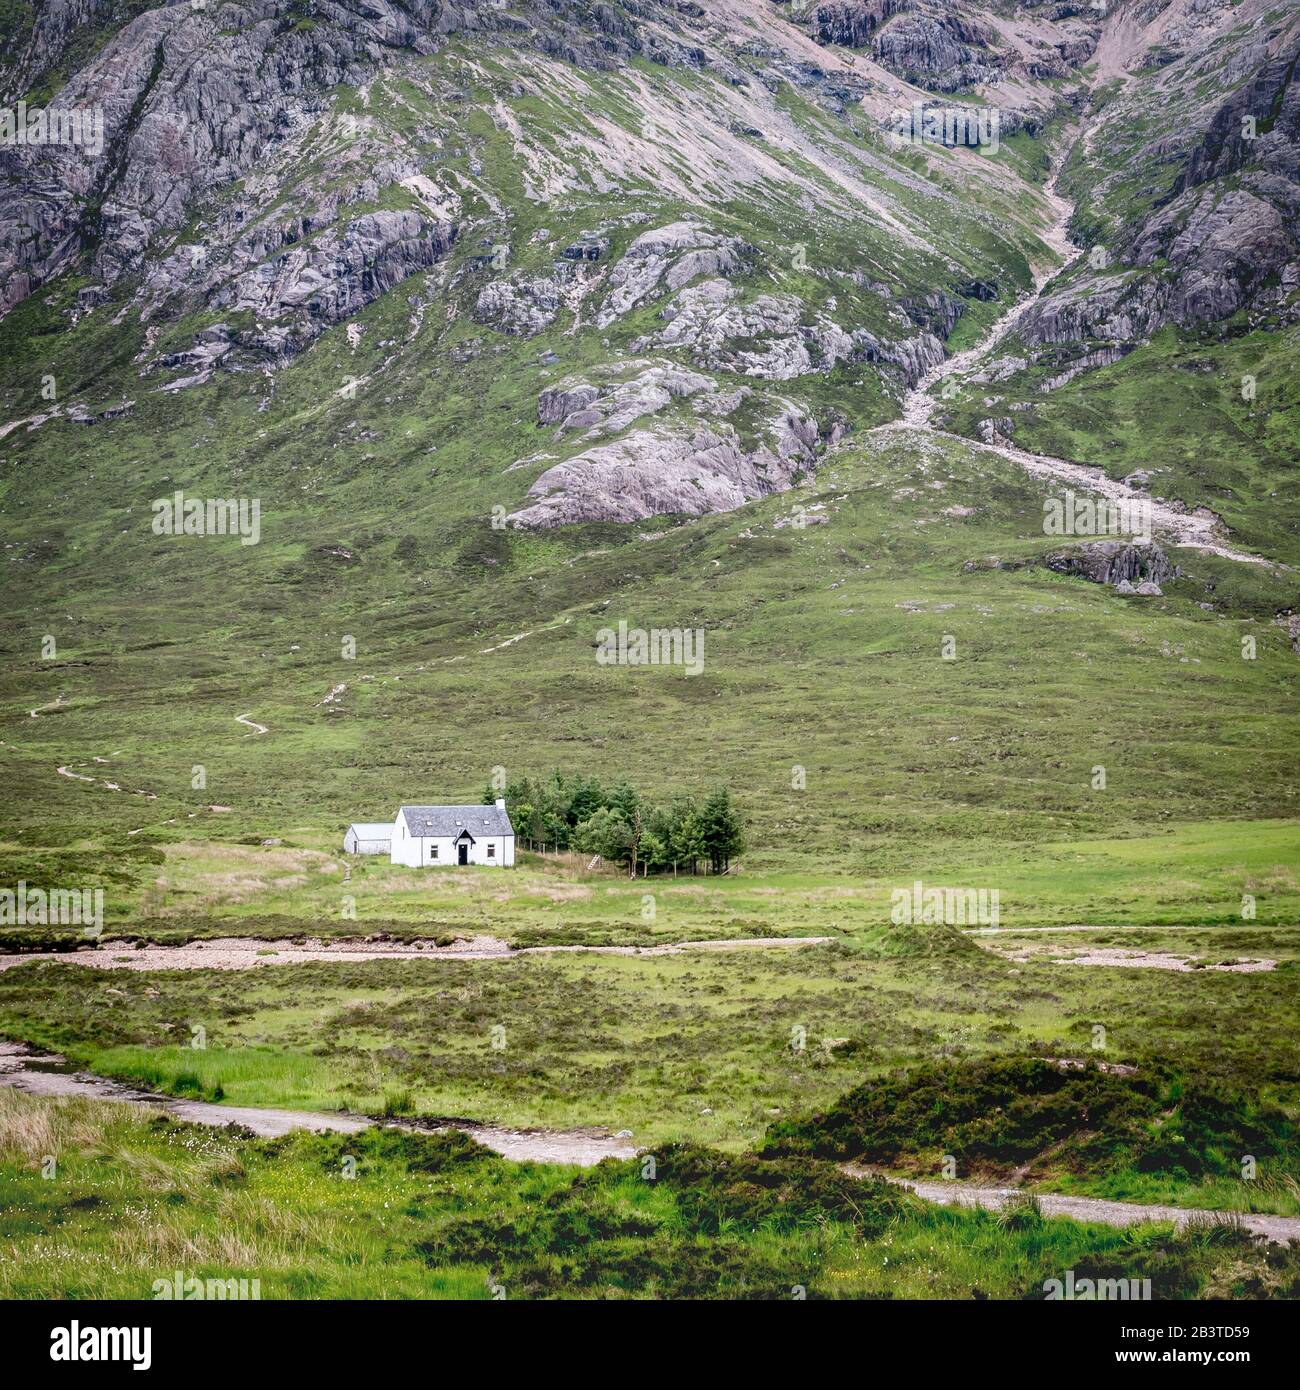 Scottish crofters cottage. The rugged landscape of the Grampian Mountains with a crofters cottage providing scale in the Highlands of Scotland. Stock Photo